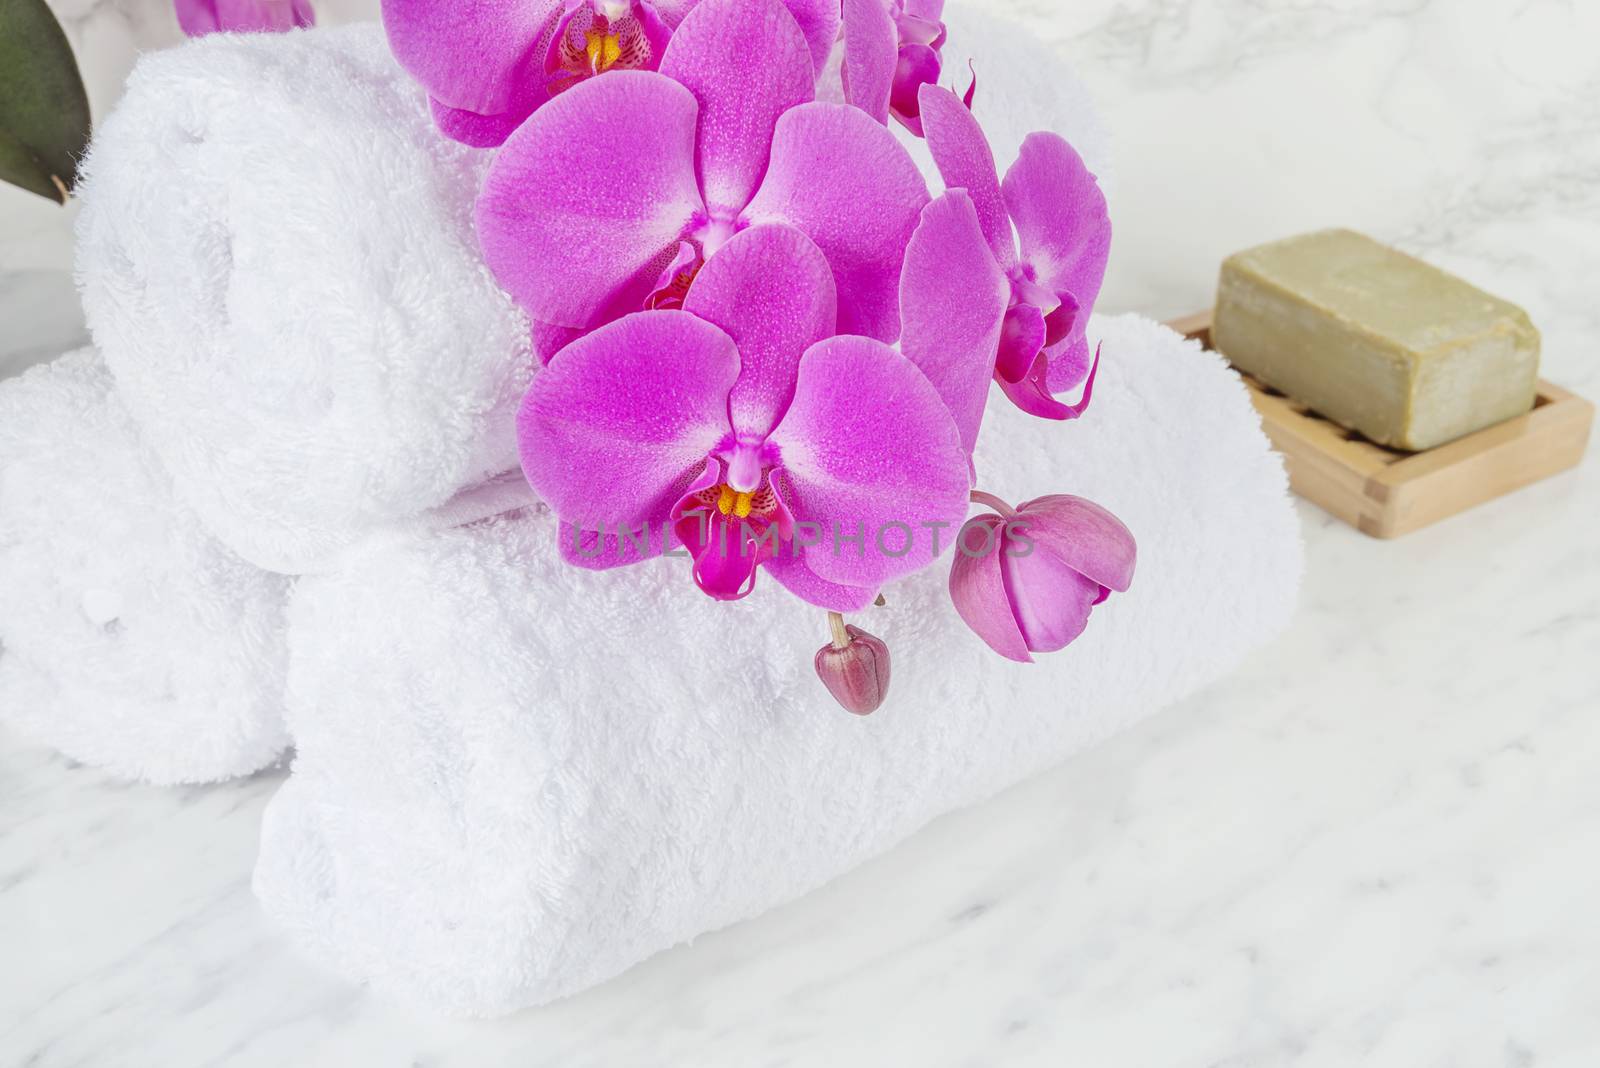 Soap, orchid and towels by Epitavi